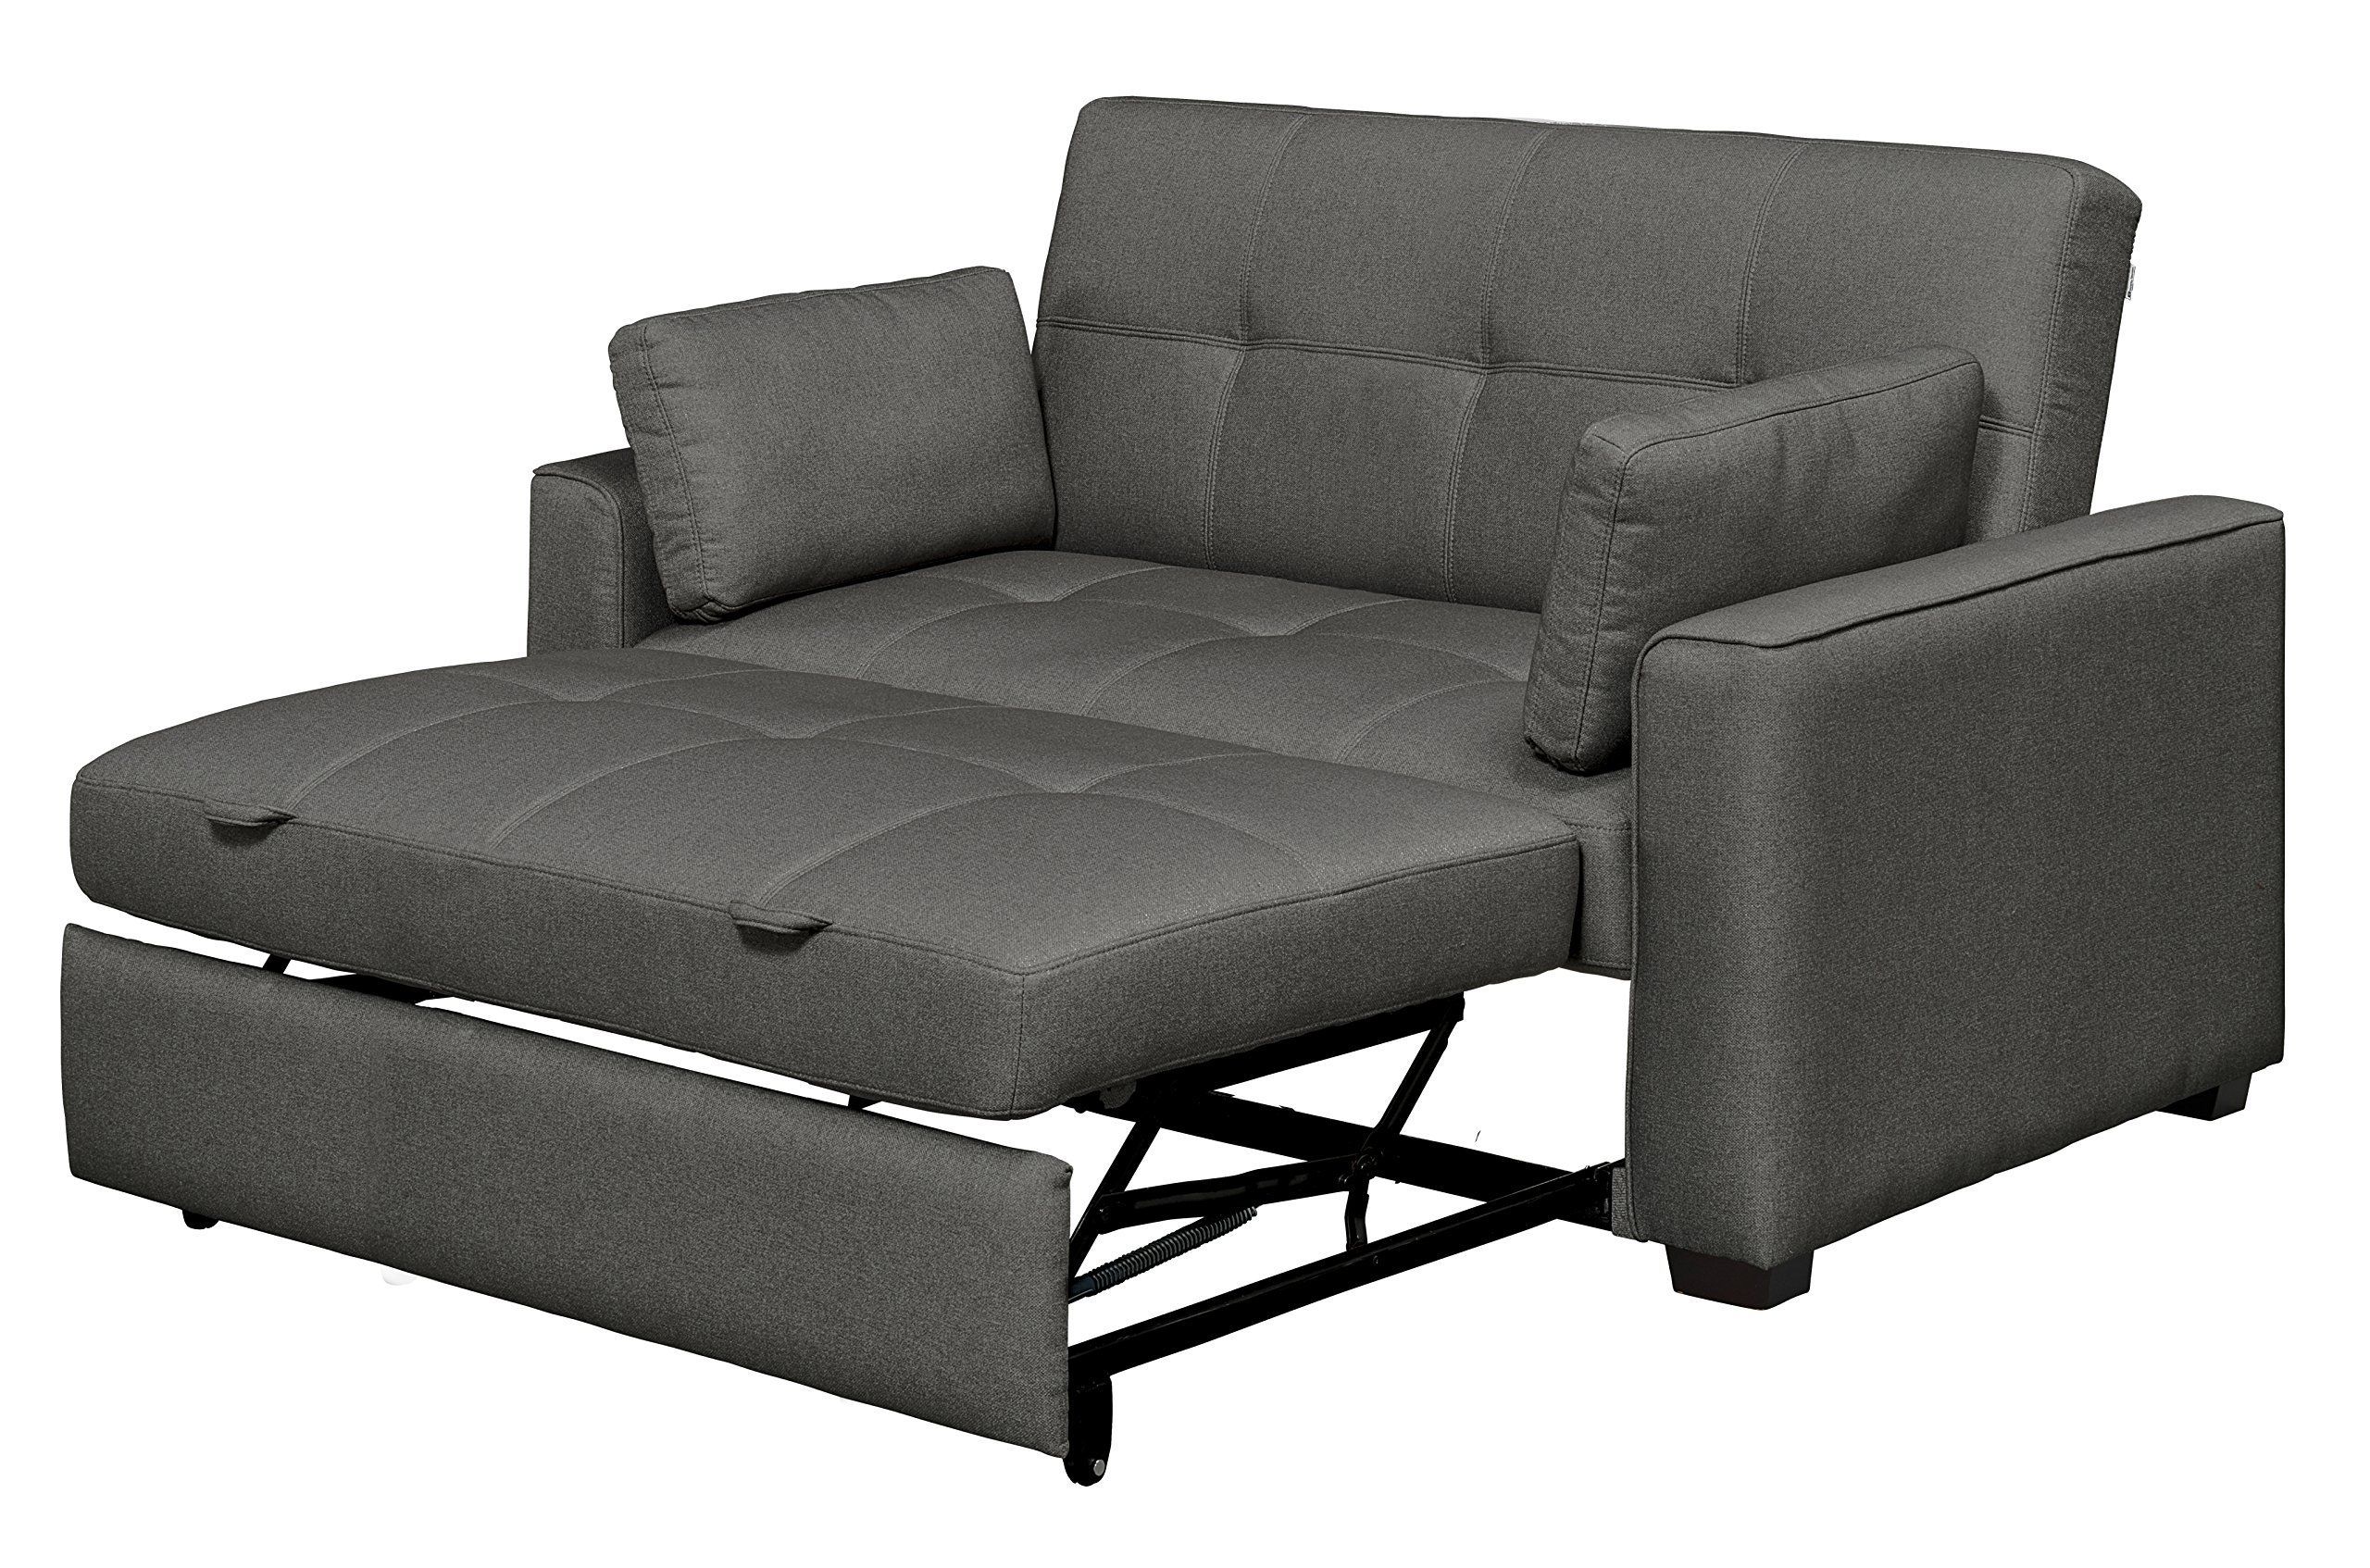 Mechali Products Furniture Serta Sofa Sleeper Convertible Into Lounger Throughout Convertible Gray Loveseat Sleepers (View 5 of 20)